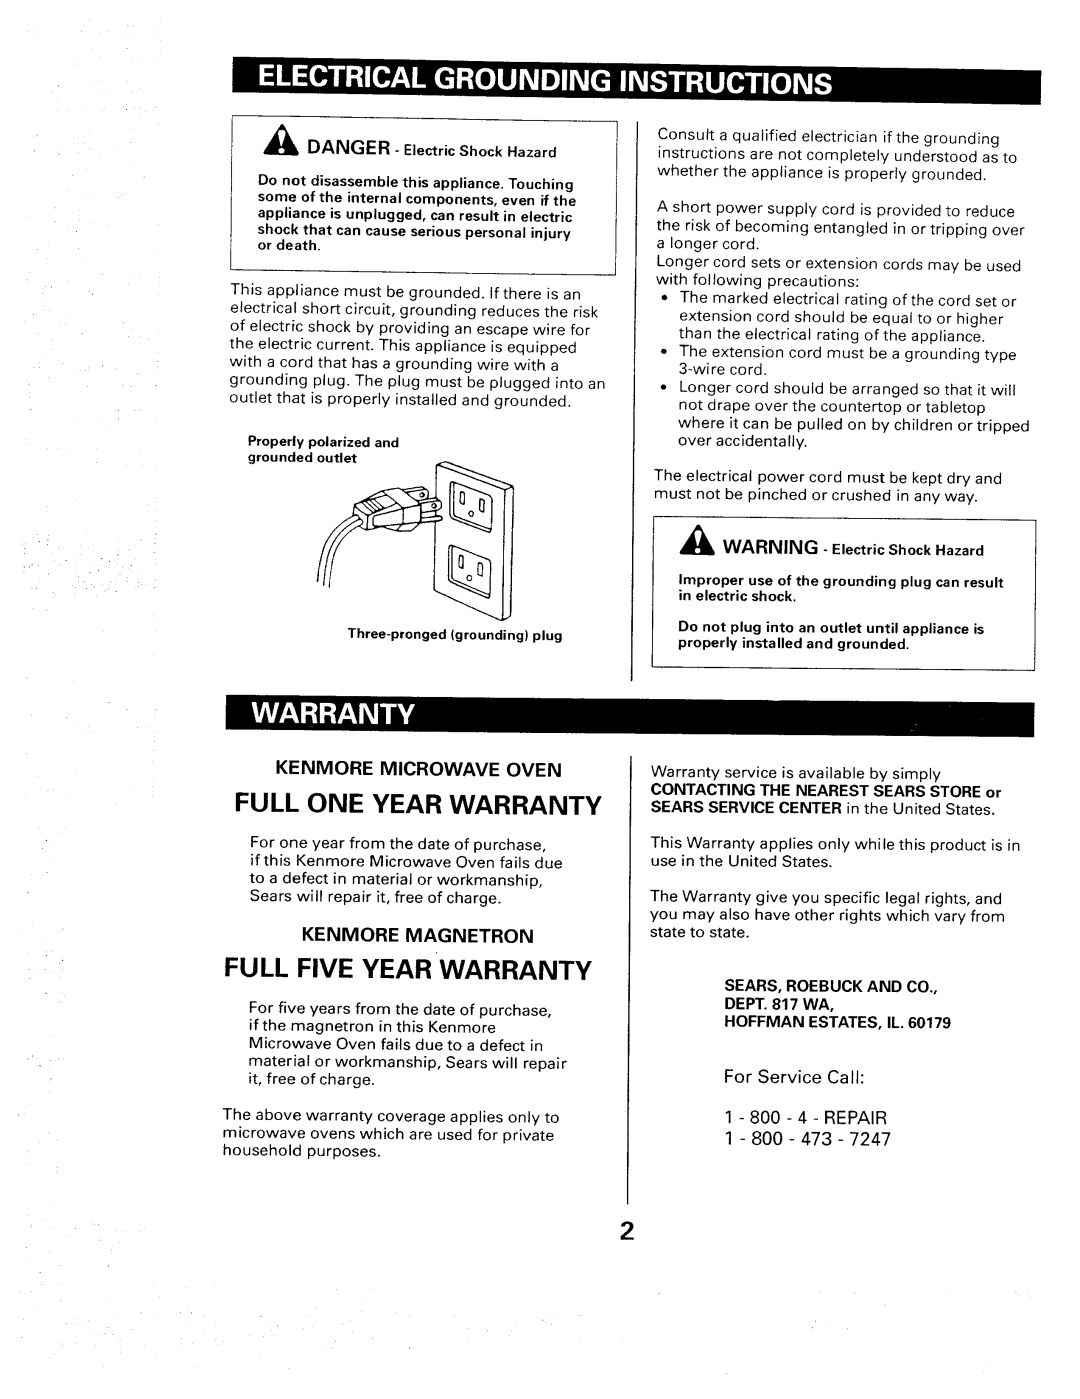 Sears 565. 66480 Full One Year Warranty, Full Five Year Warranty, Kenmore Microwave Oven, Kenmore Magnetron, 1 - 800 - 473 